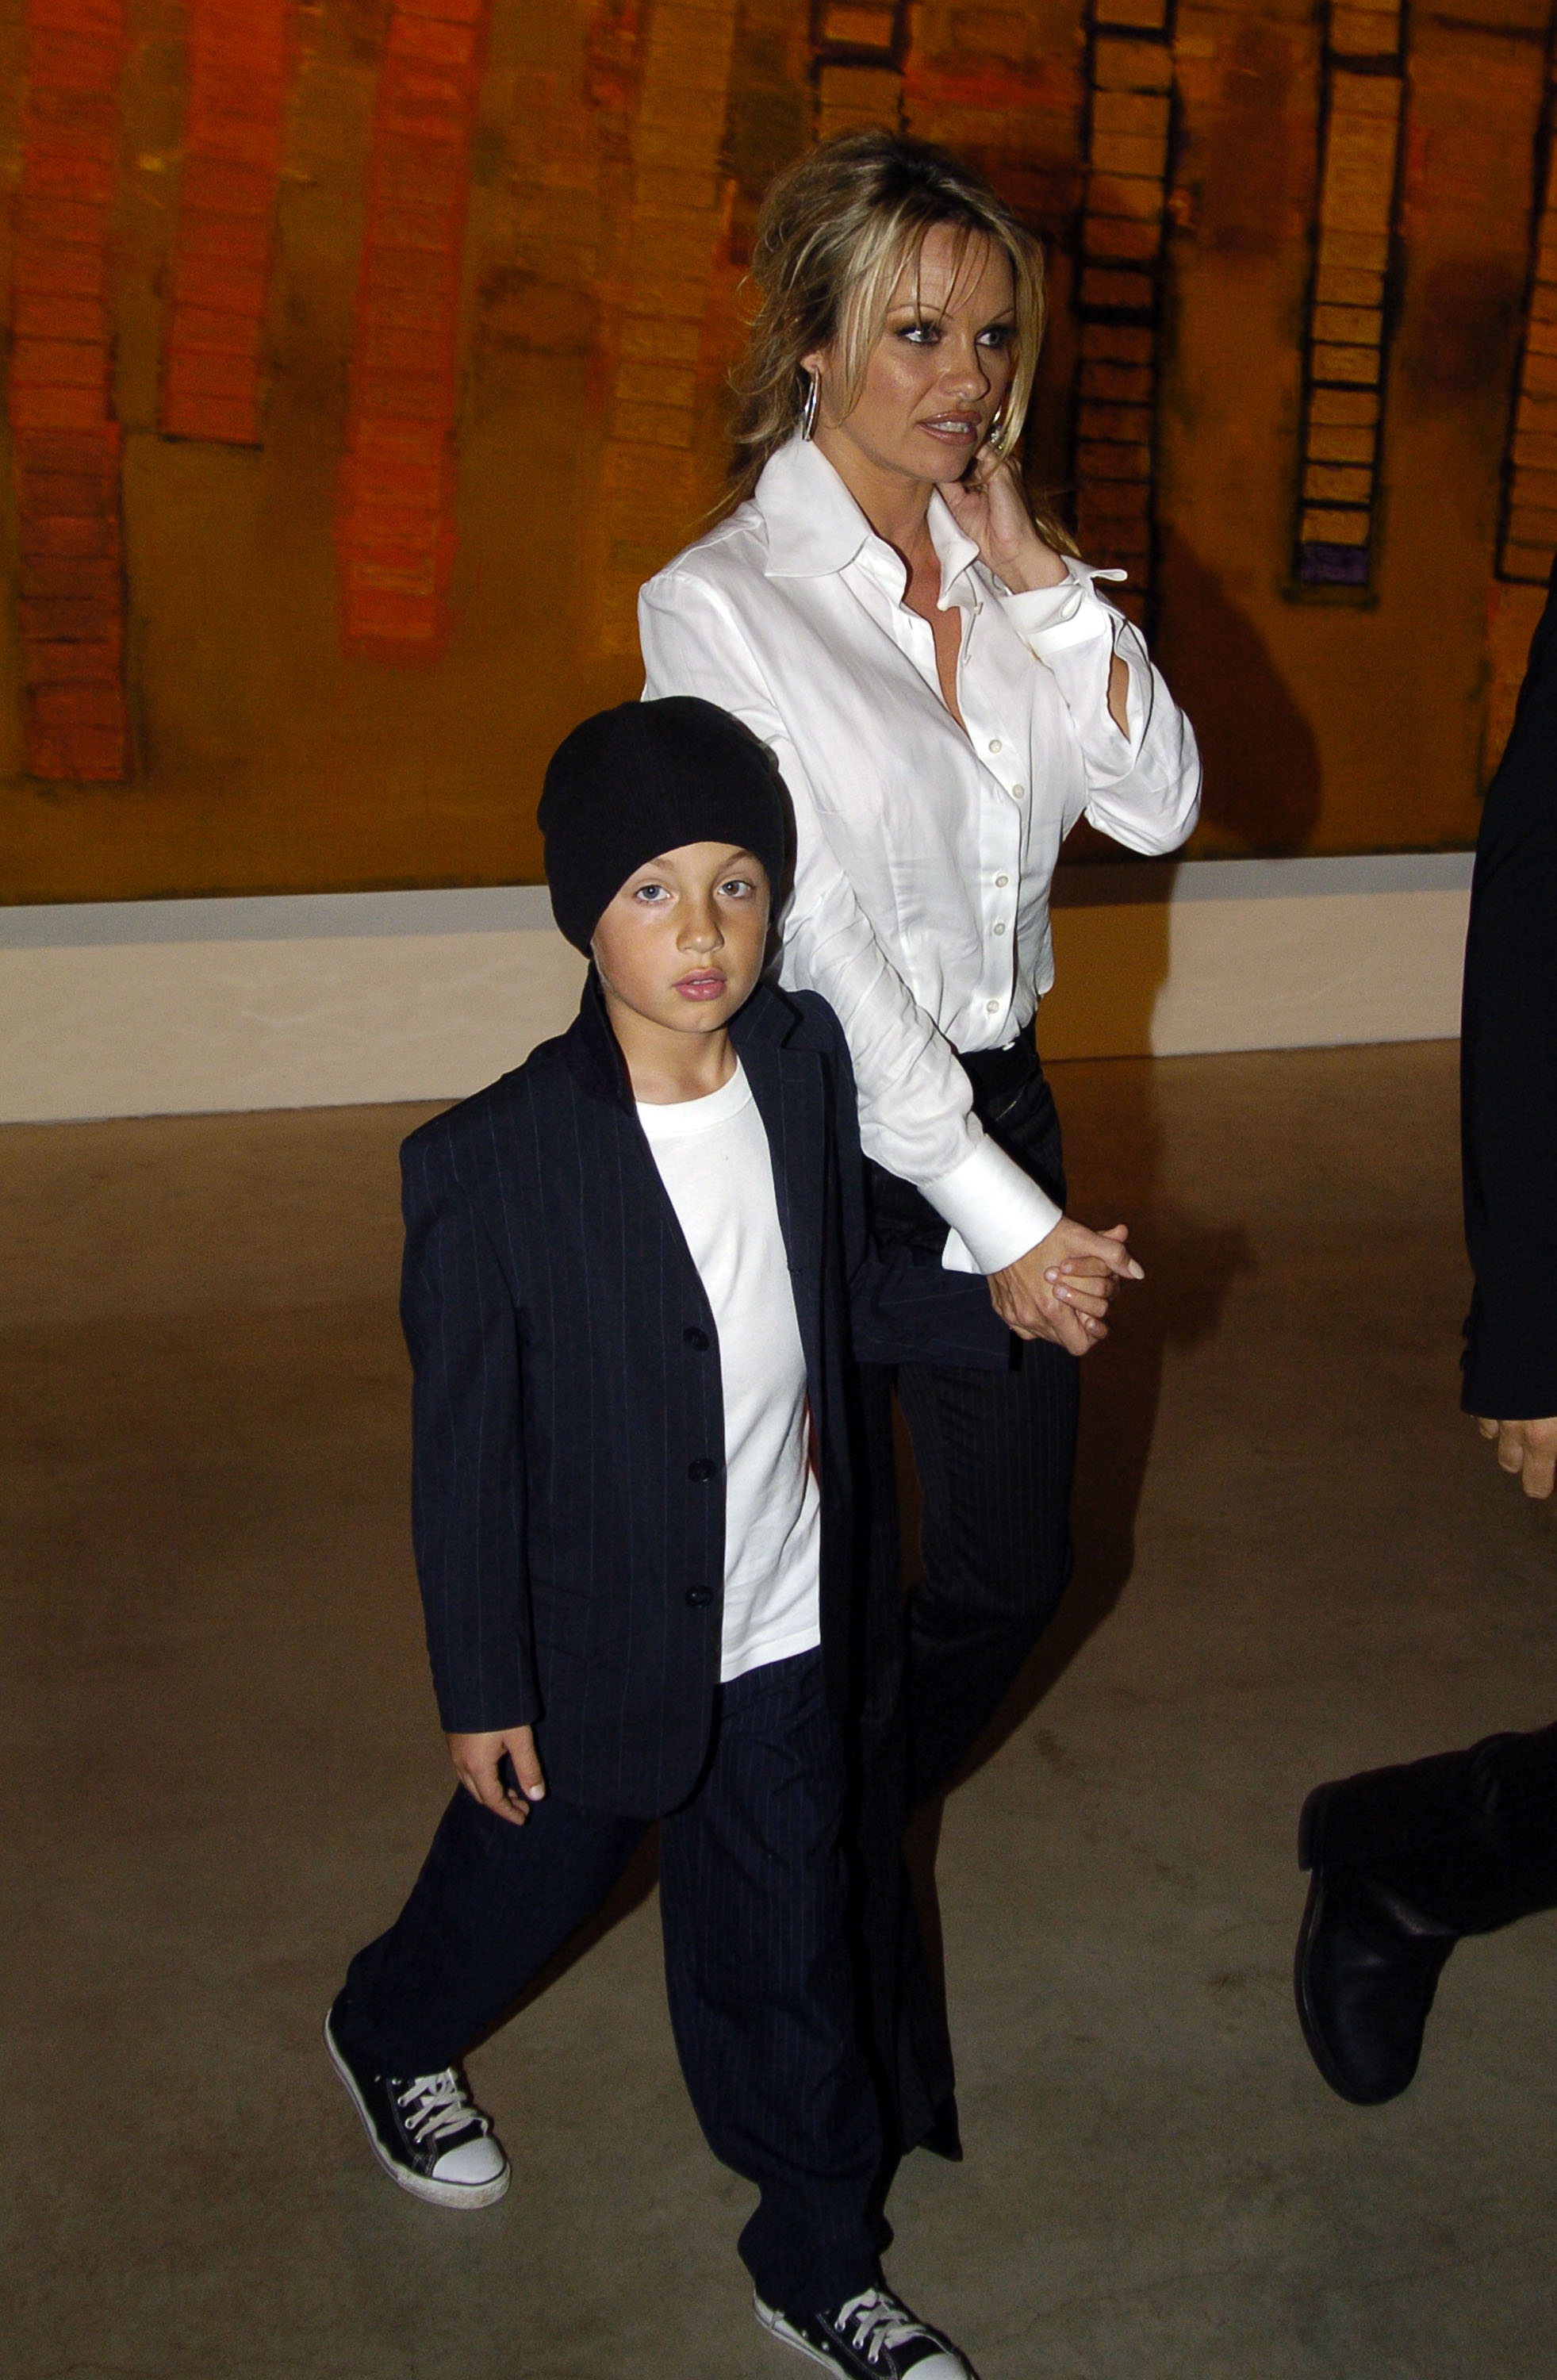 Pamela Anderson, and her son Brandon in California in 2005 | Source: Getty Images